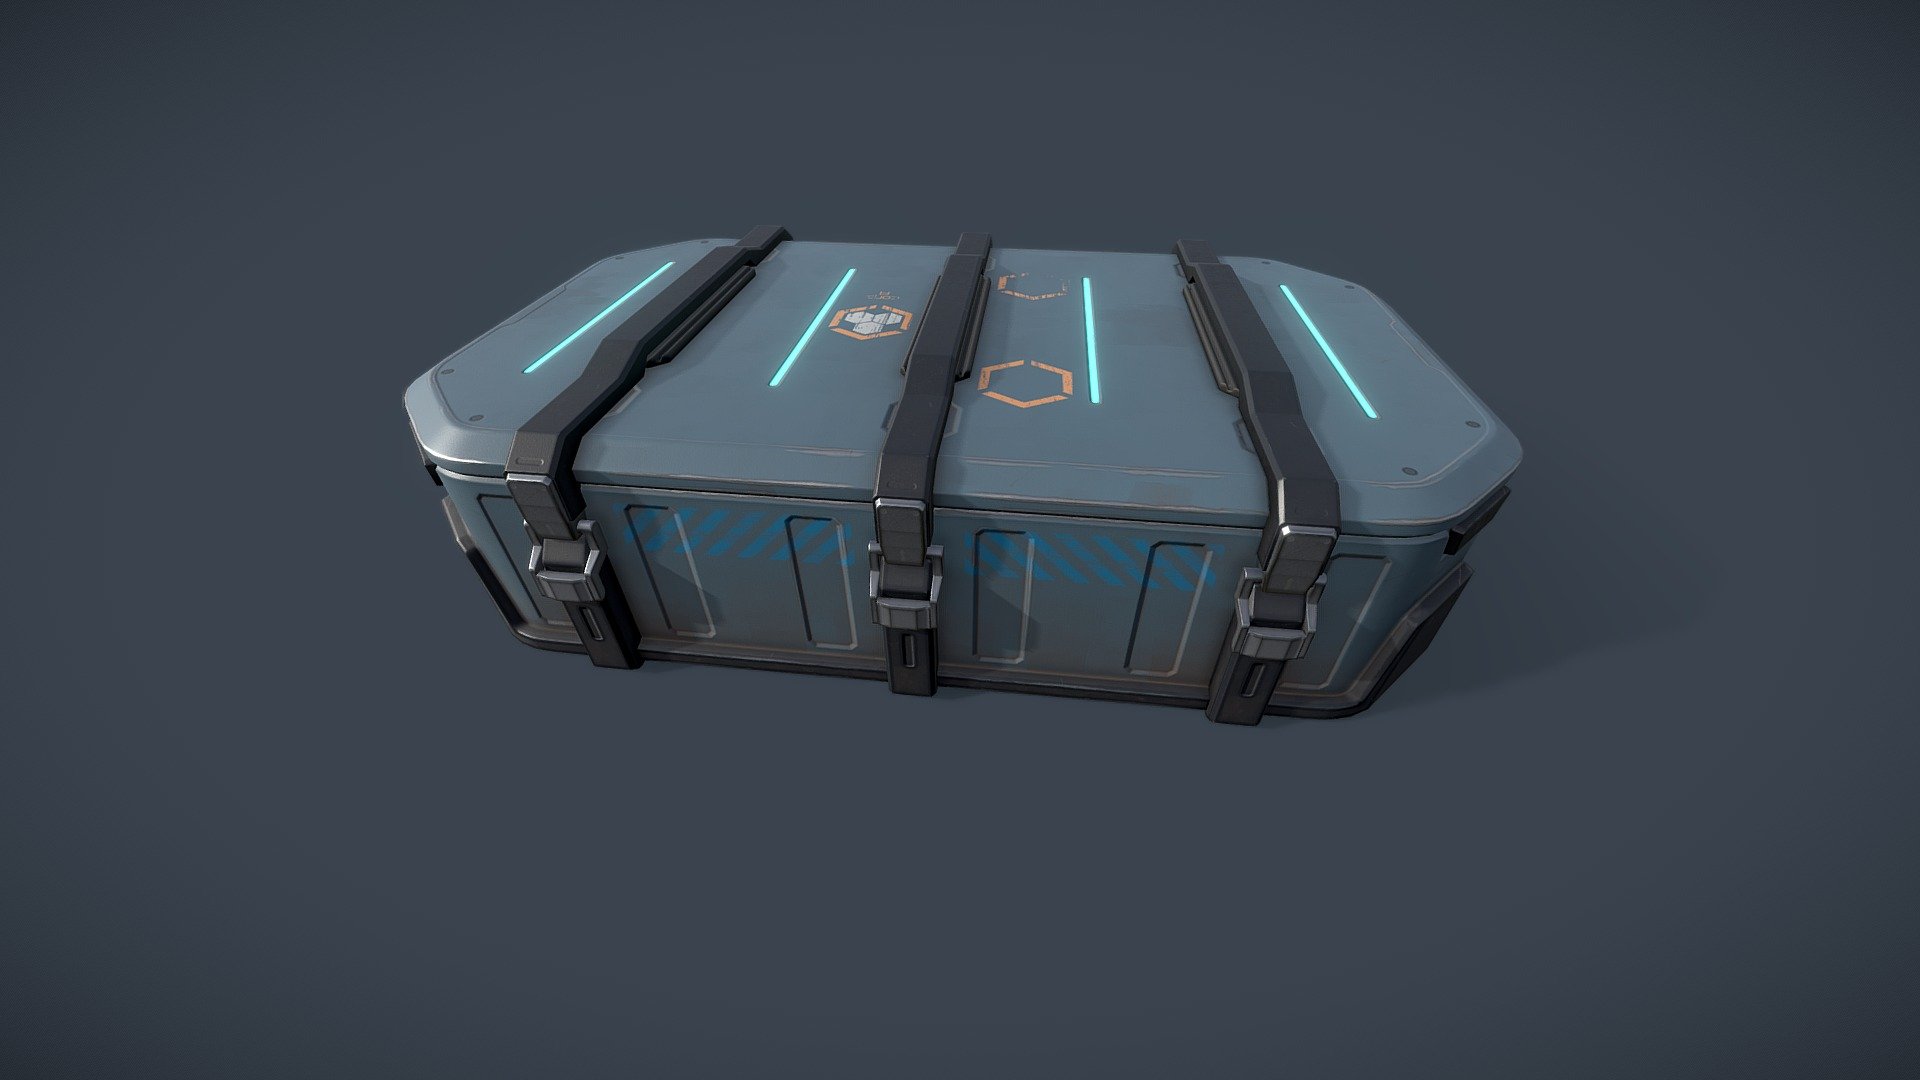 Sci-fi crate low-poly model with interior space for fps game. Open/close state animations. 4K PBR textures included 3d model